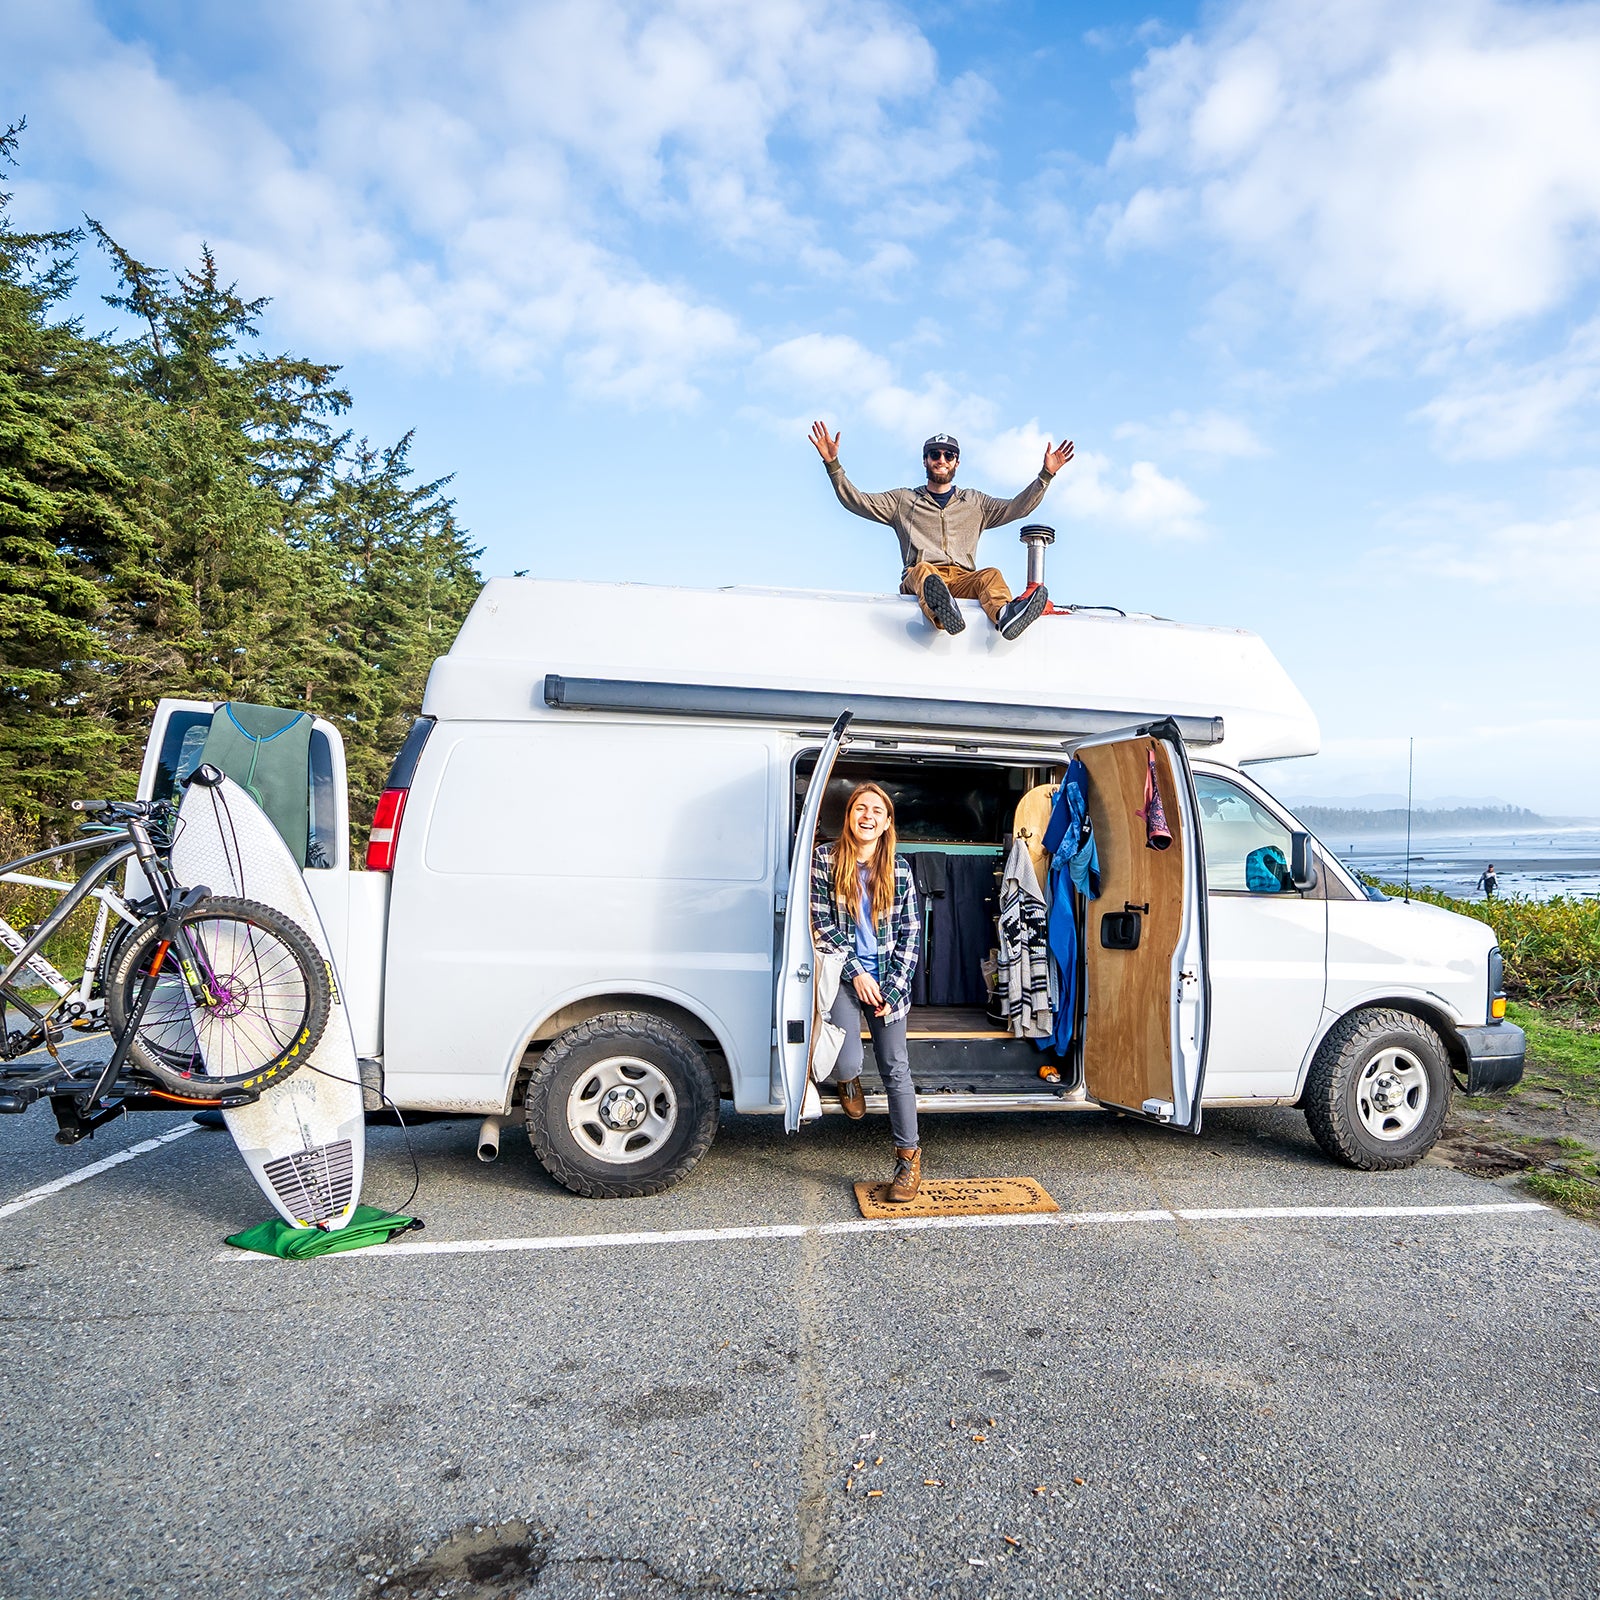 Find the Balance: #Vanlife - How not to turn a trend into a nuisance